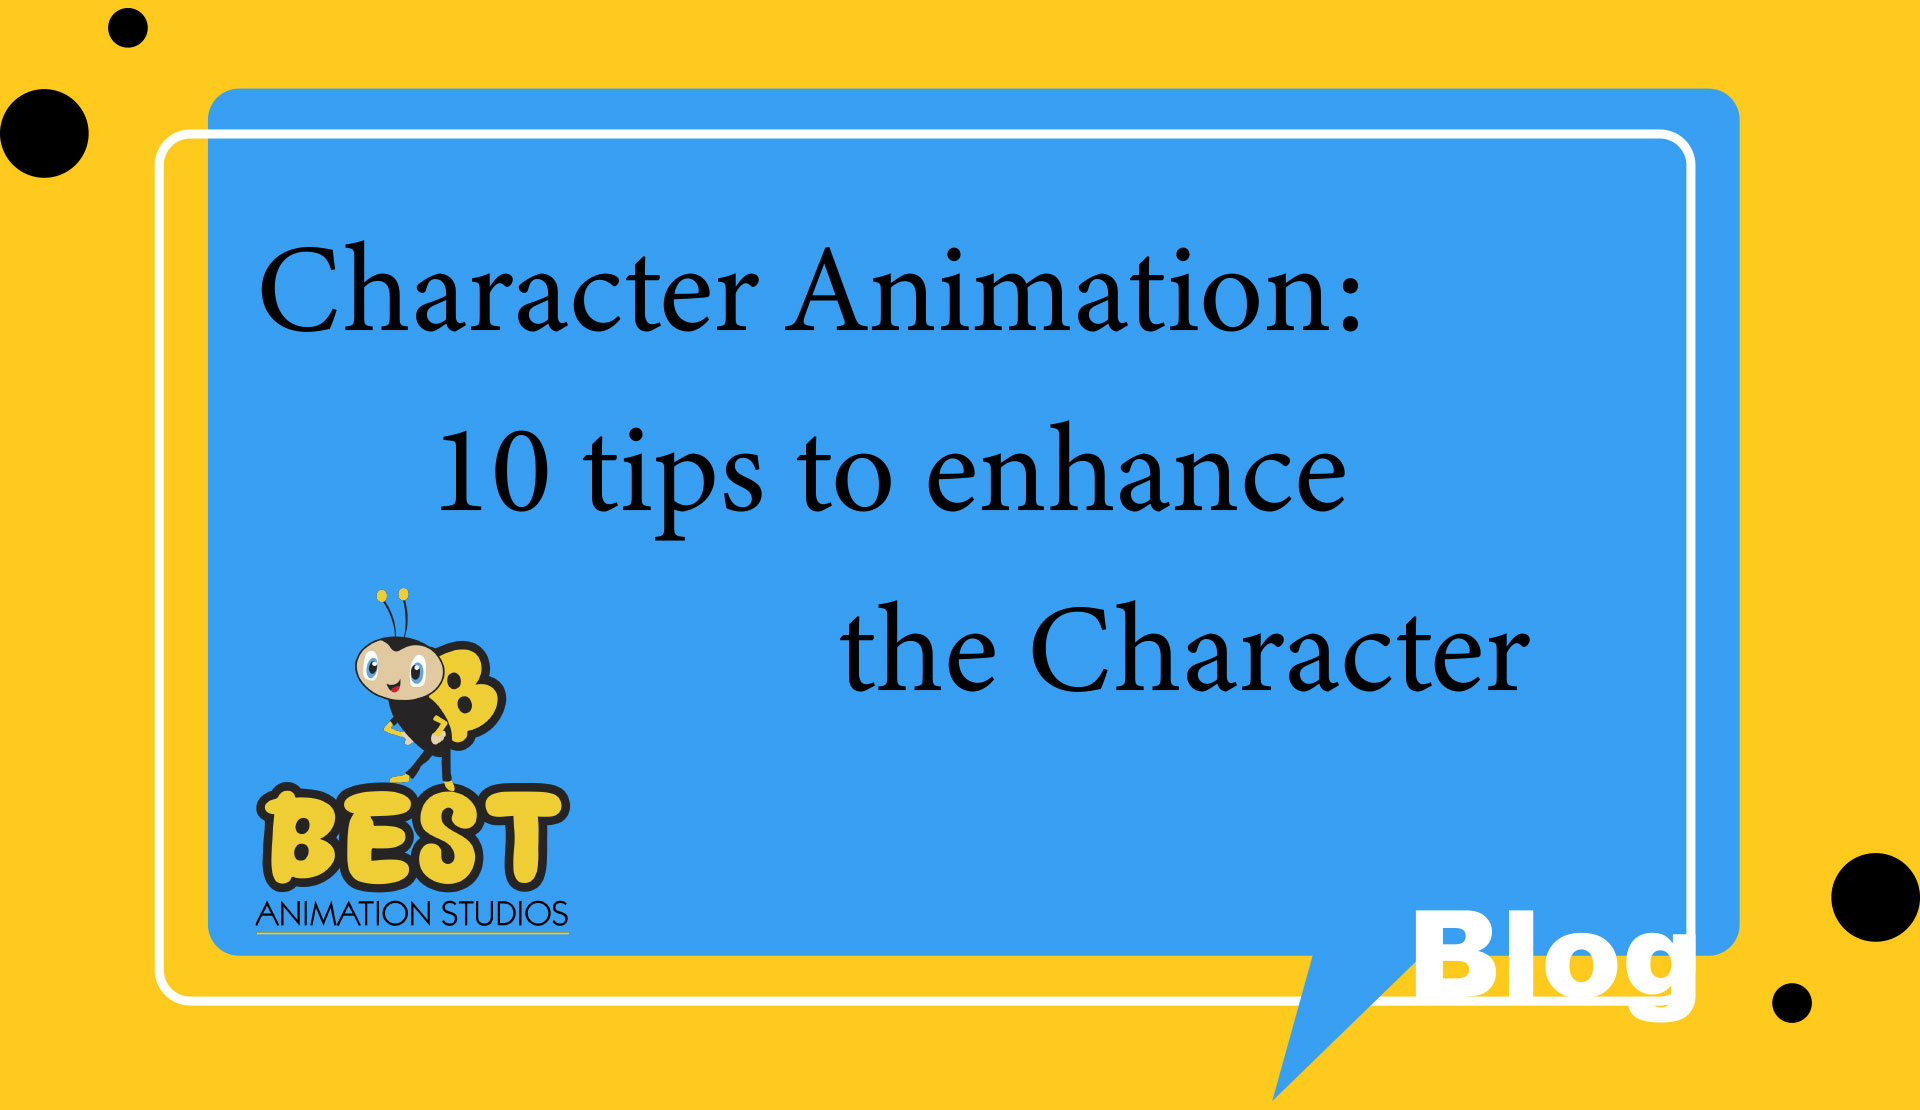 Character Animation: 10 tips to enhance the Character